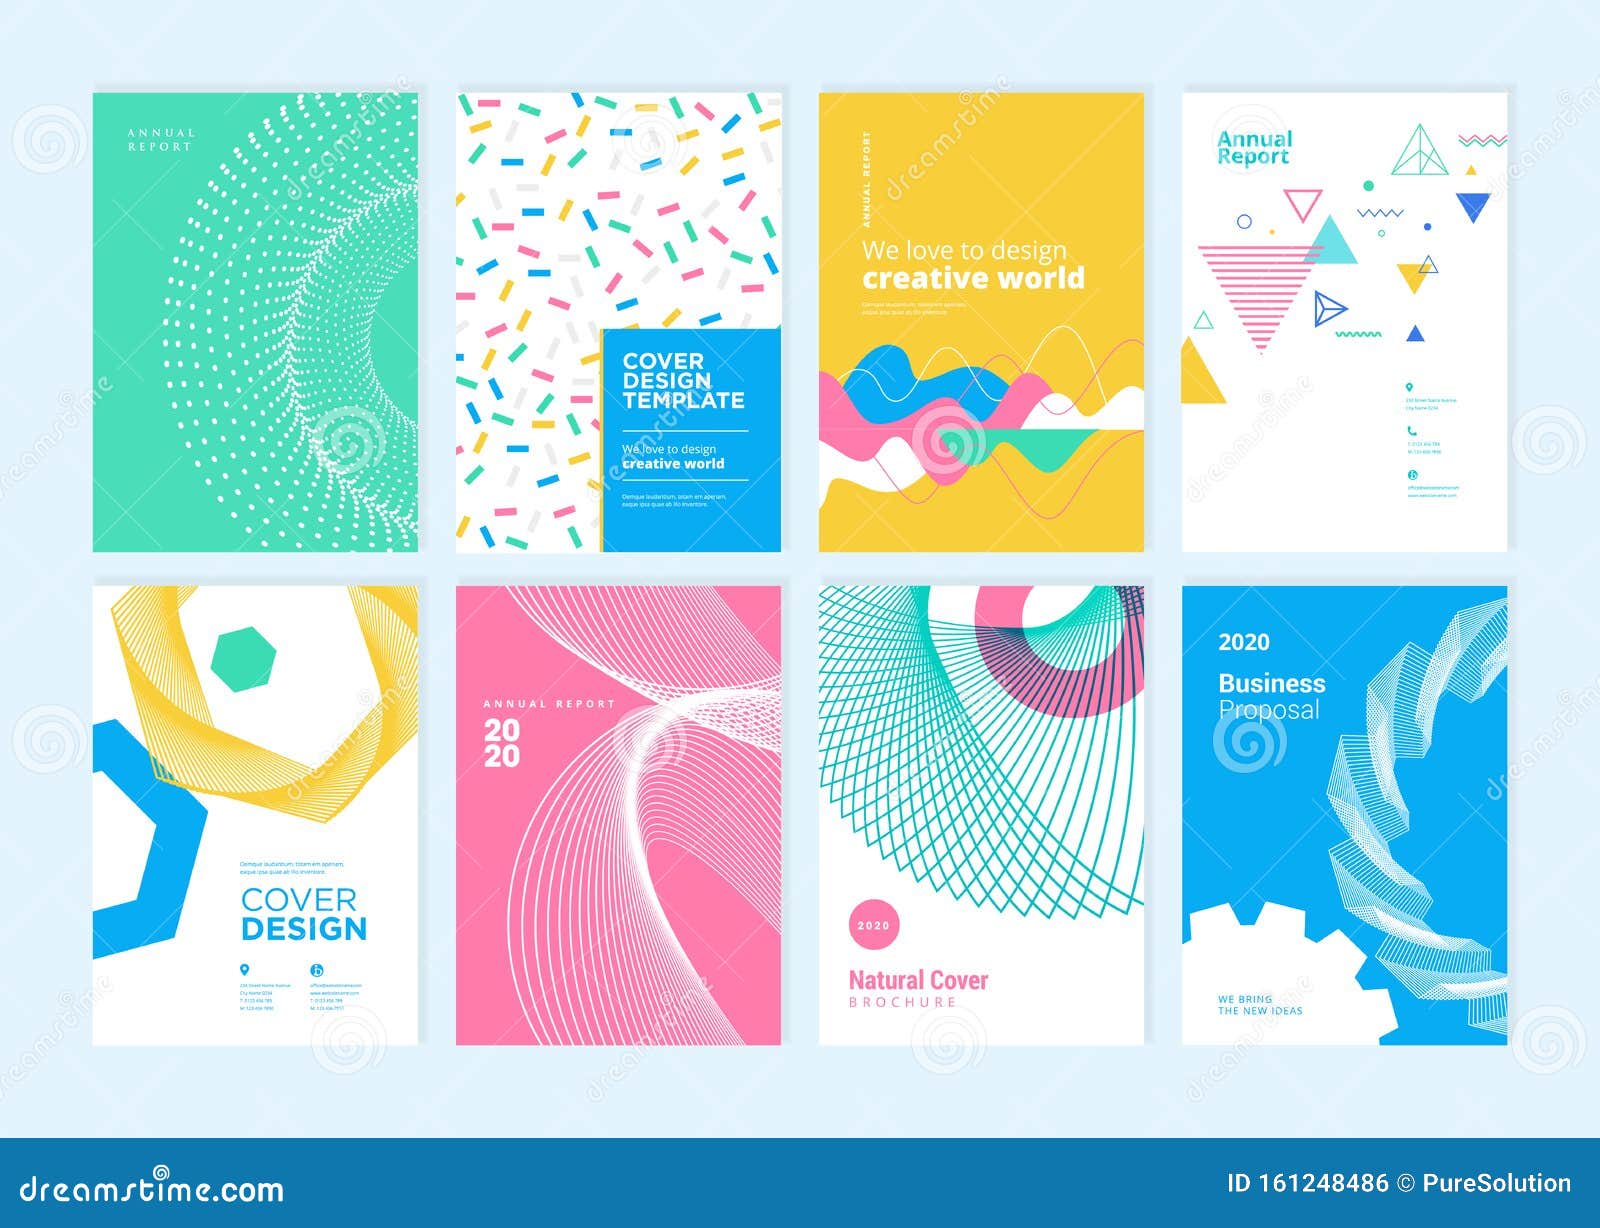 brochure, , , abstract, business, template, annual, report, flyer, presentation, layout, cover, marketing, corpo